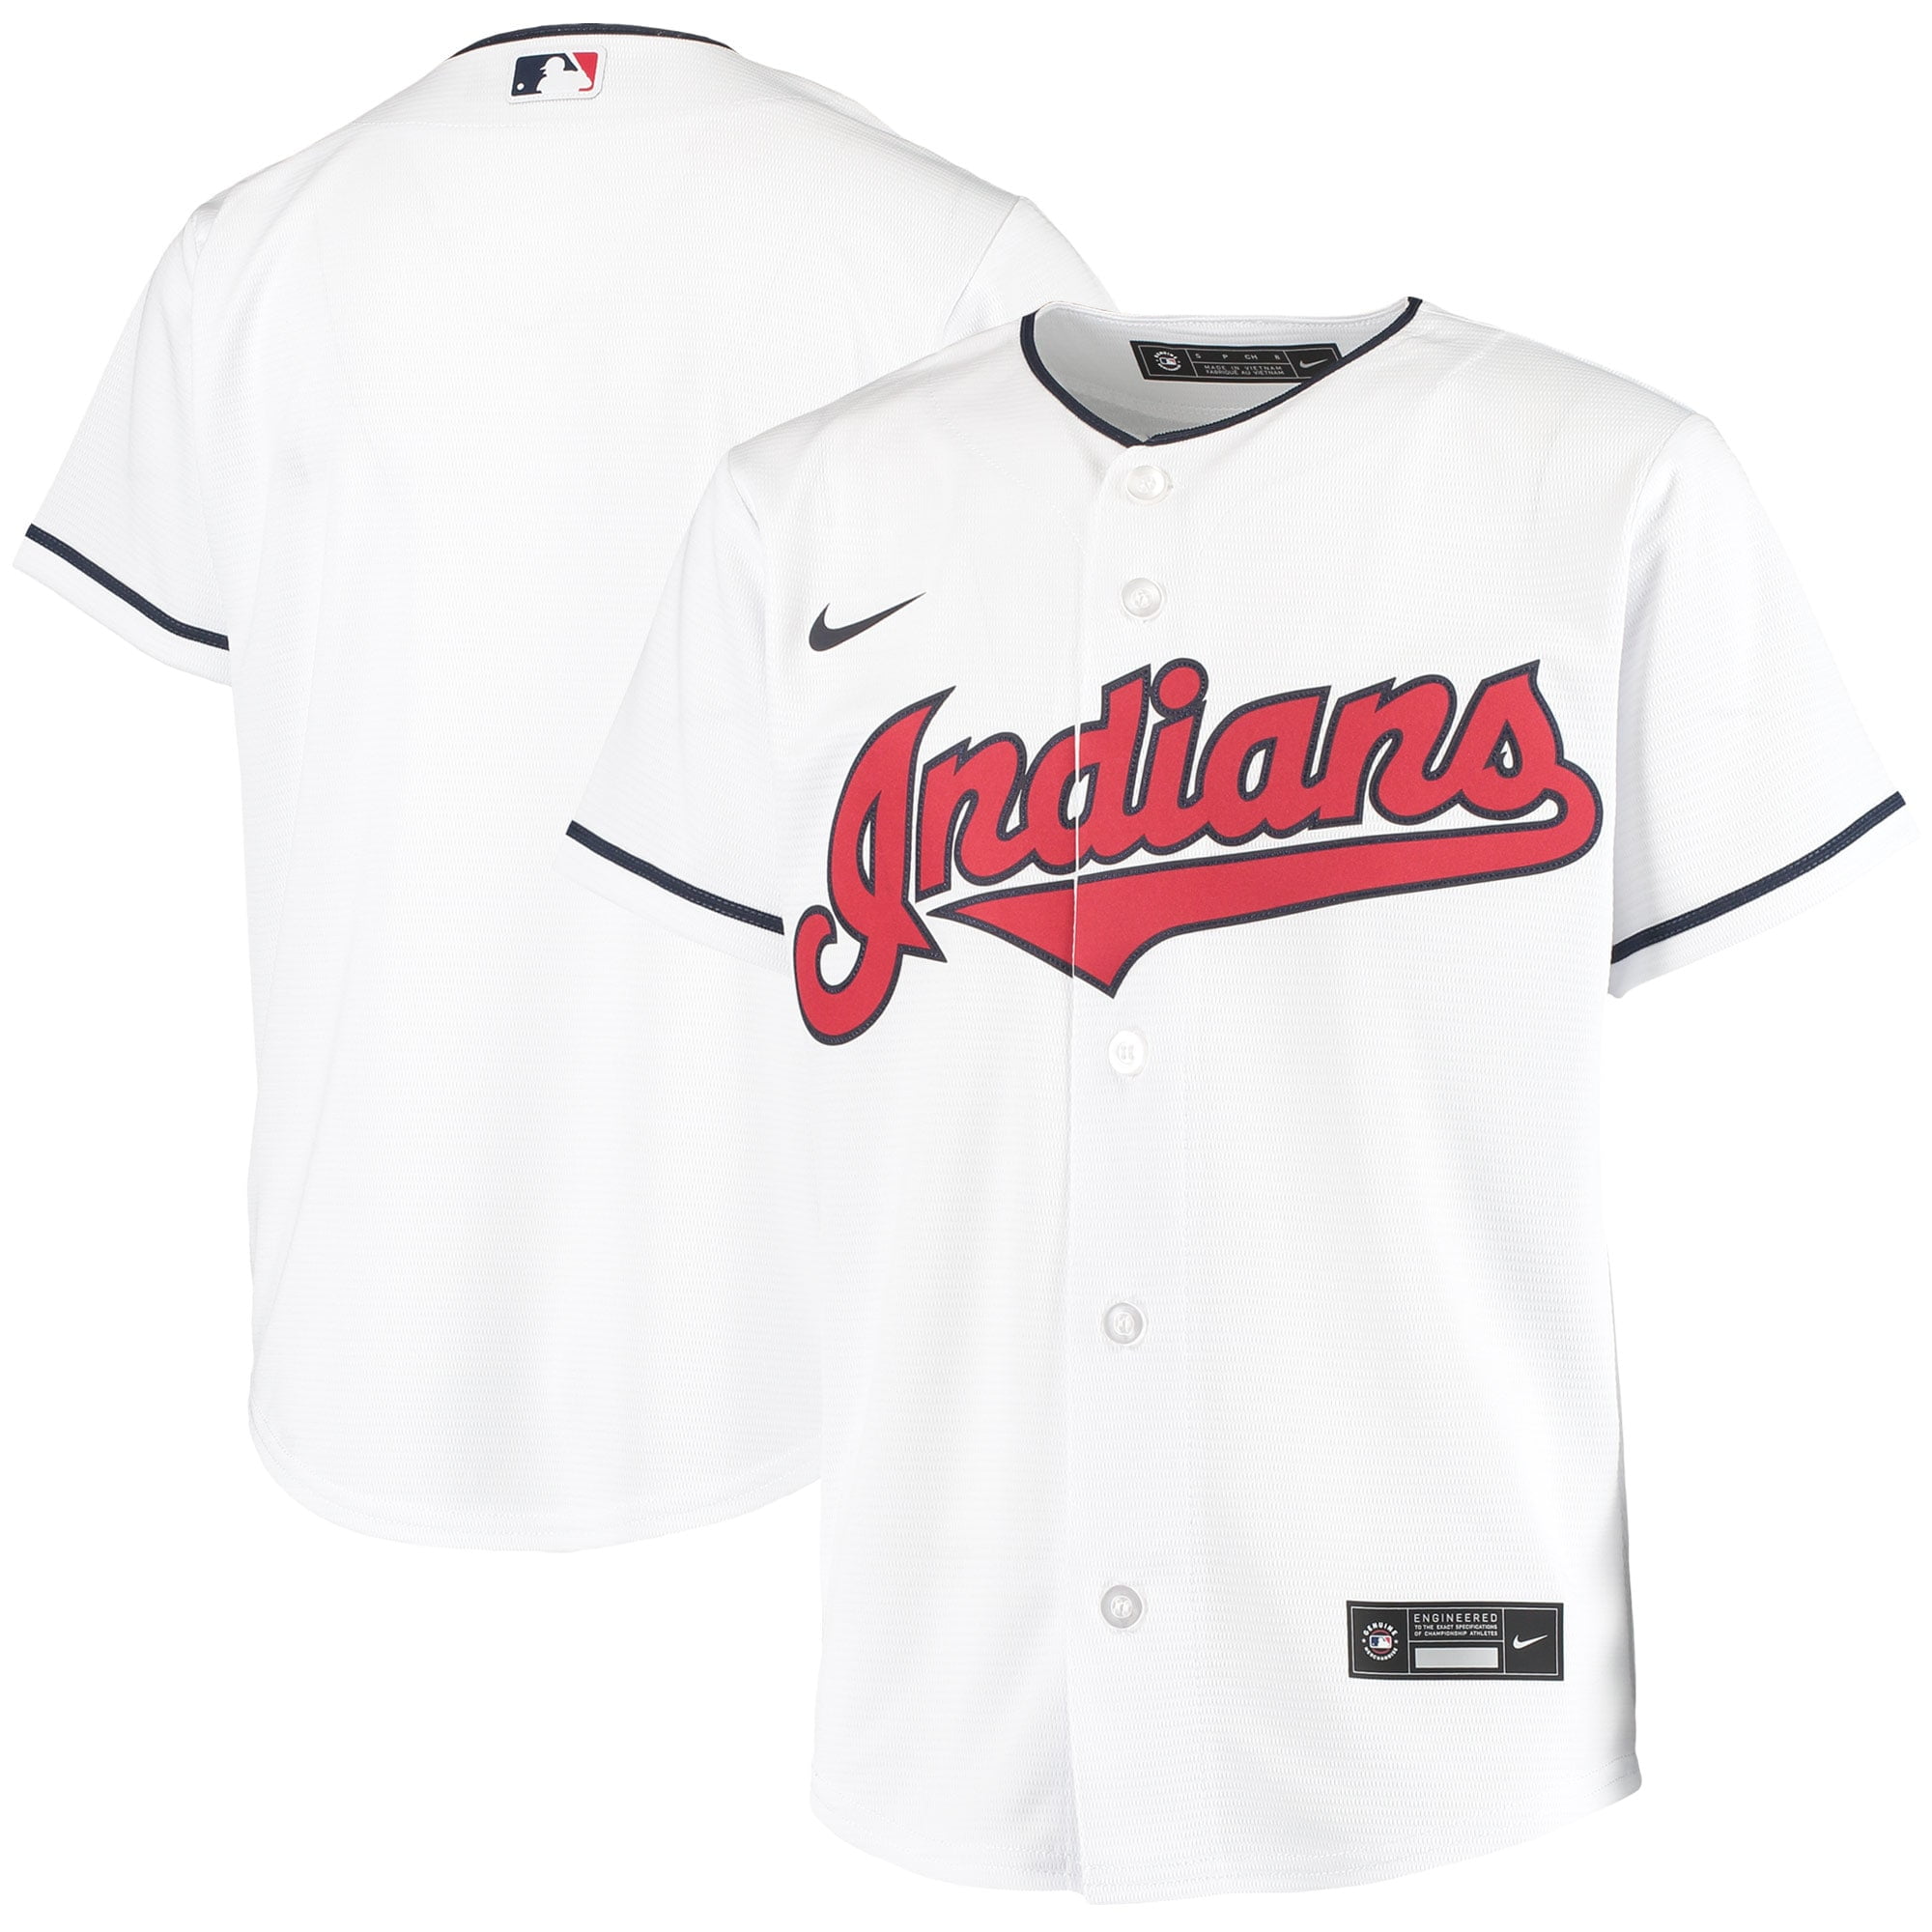 Men's Majestic White Cleveland Indians Official Cool Base Jersey 